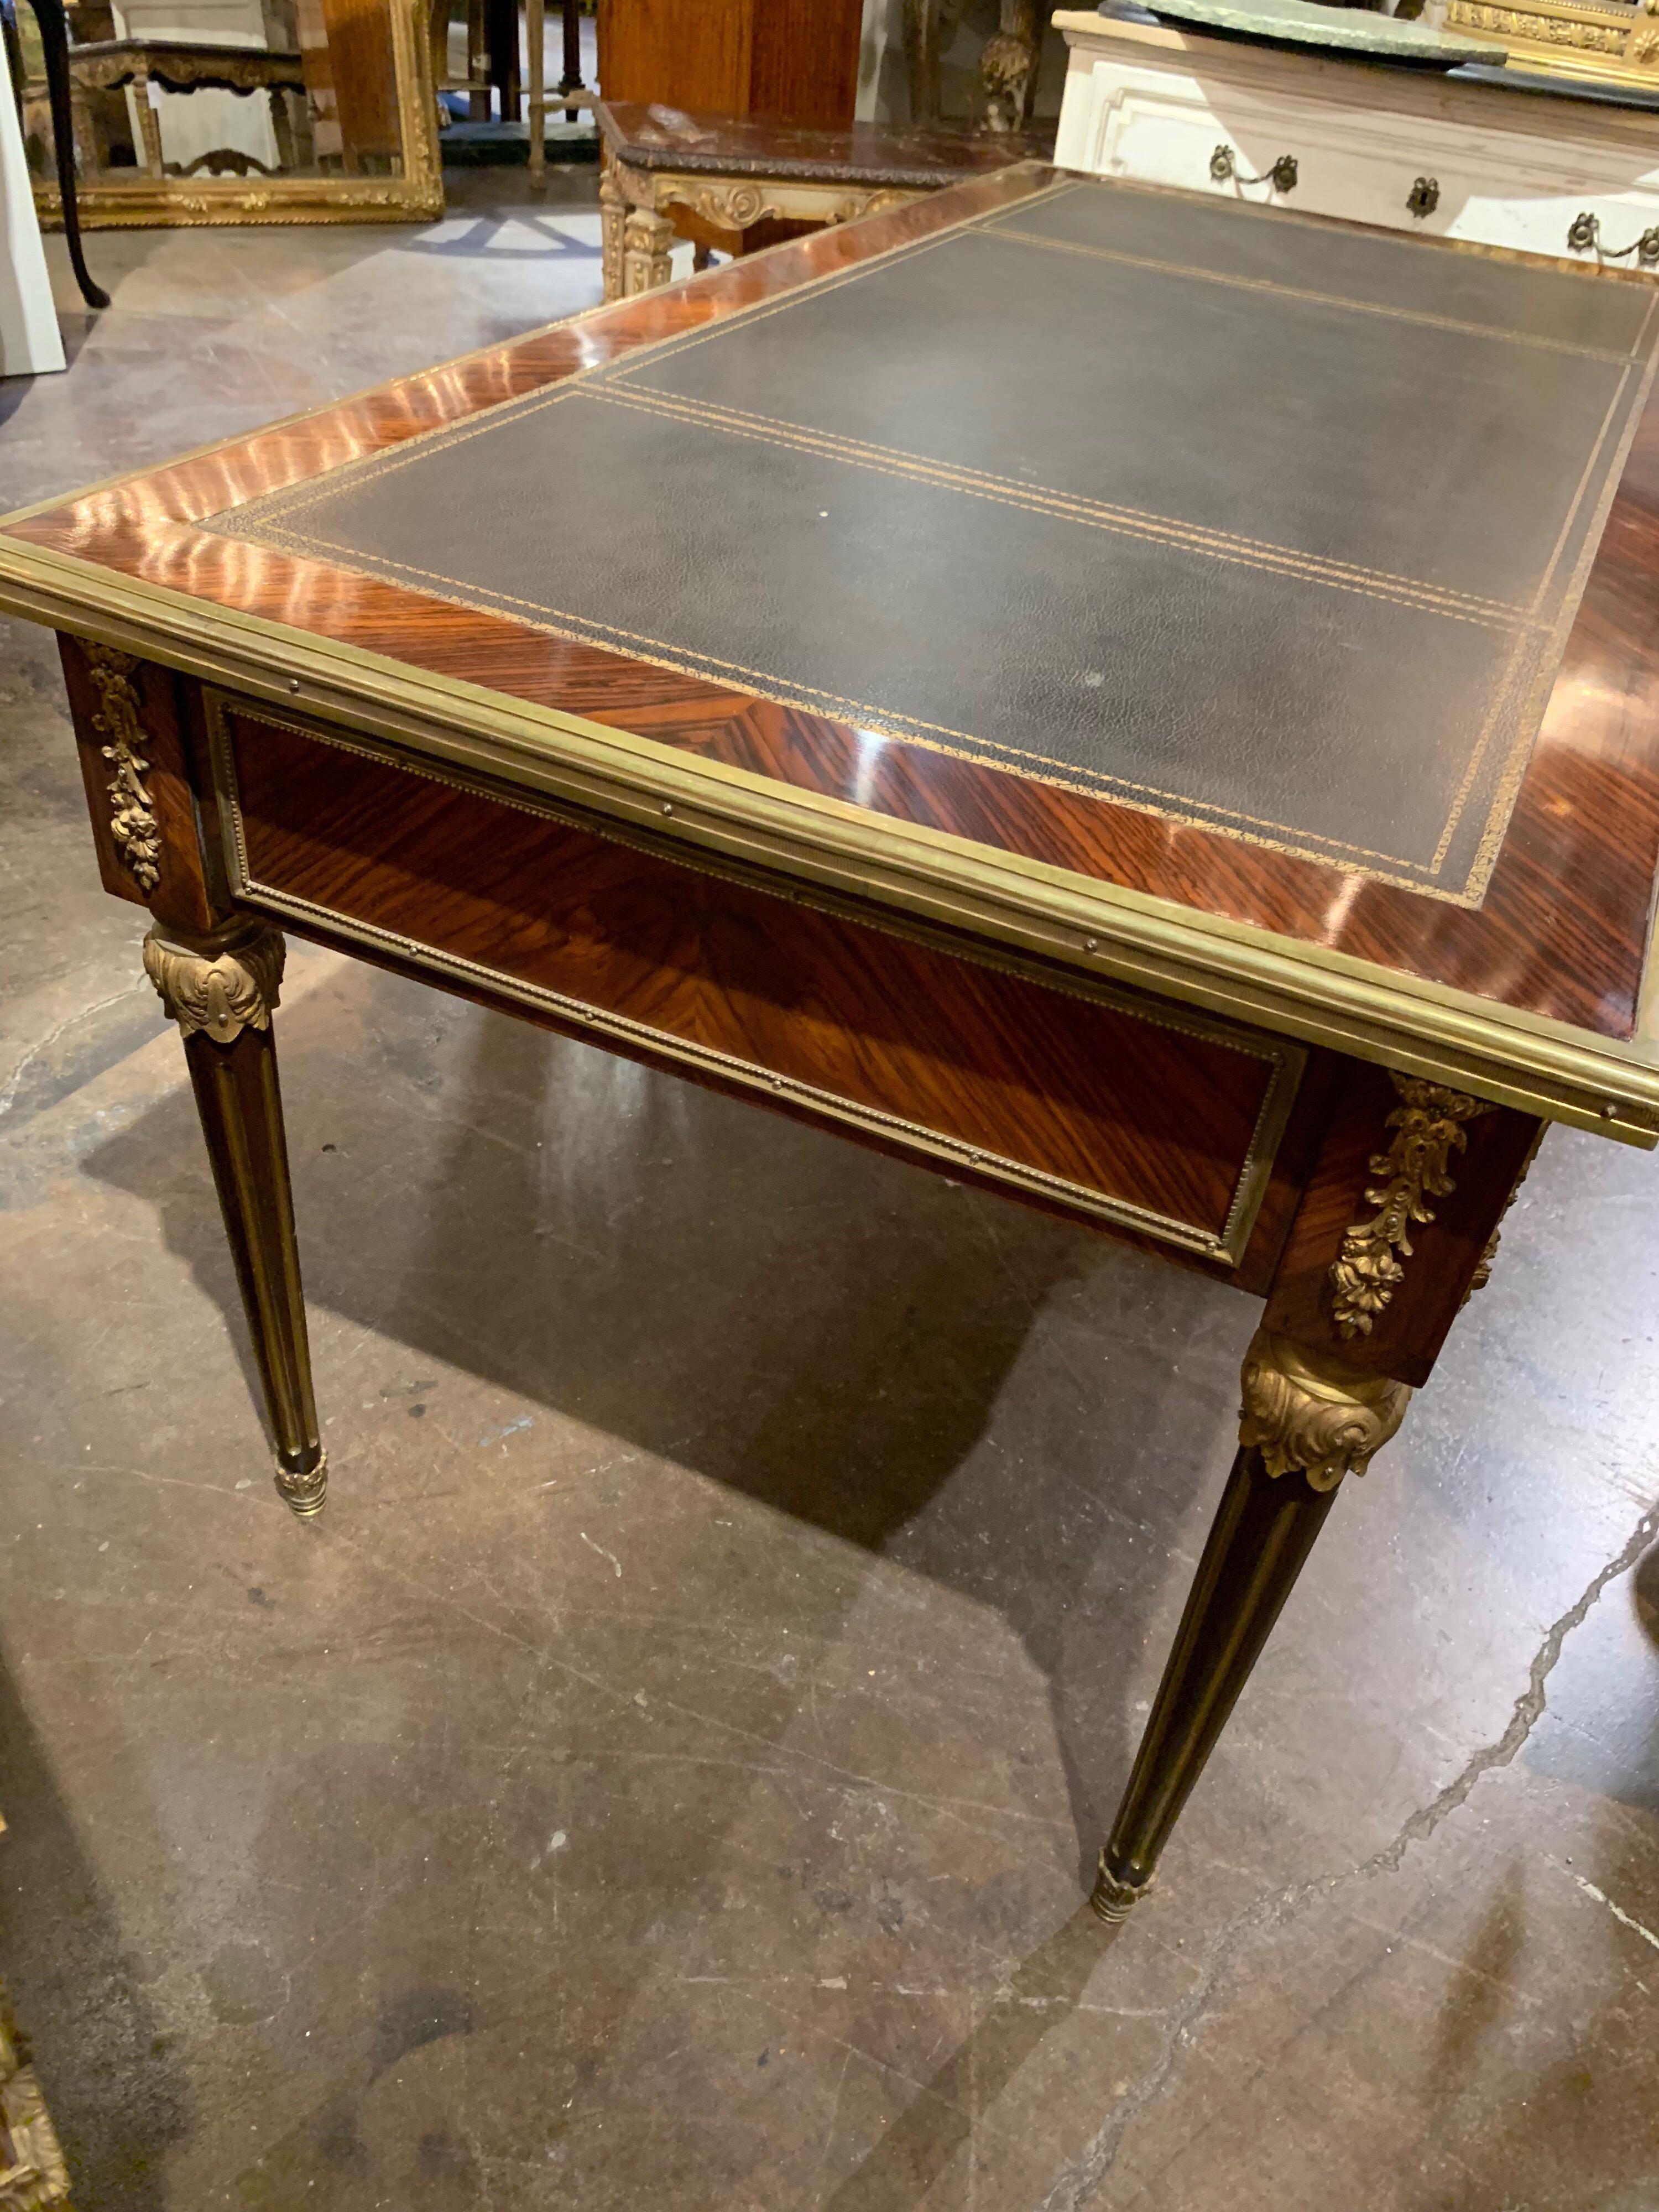 Very elegant French Empire style rosewood desk. Beautiful gilt bronze mounts and leather top. An impressive piece for a fine home.